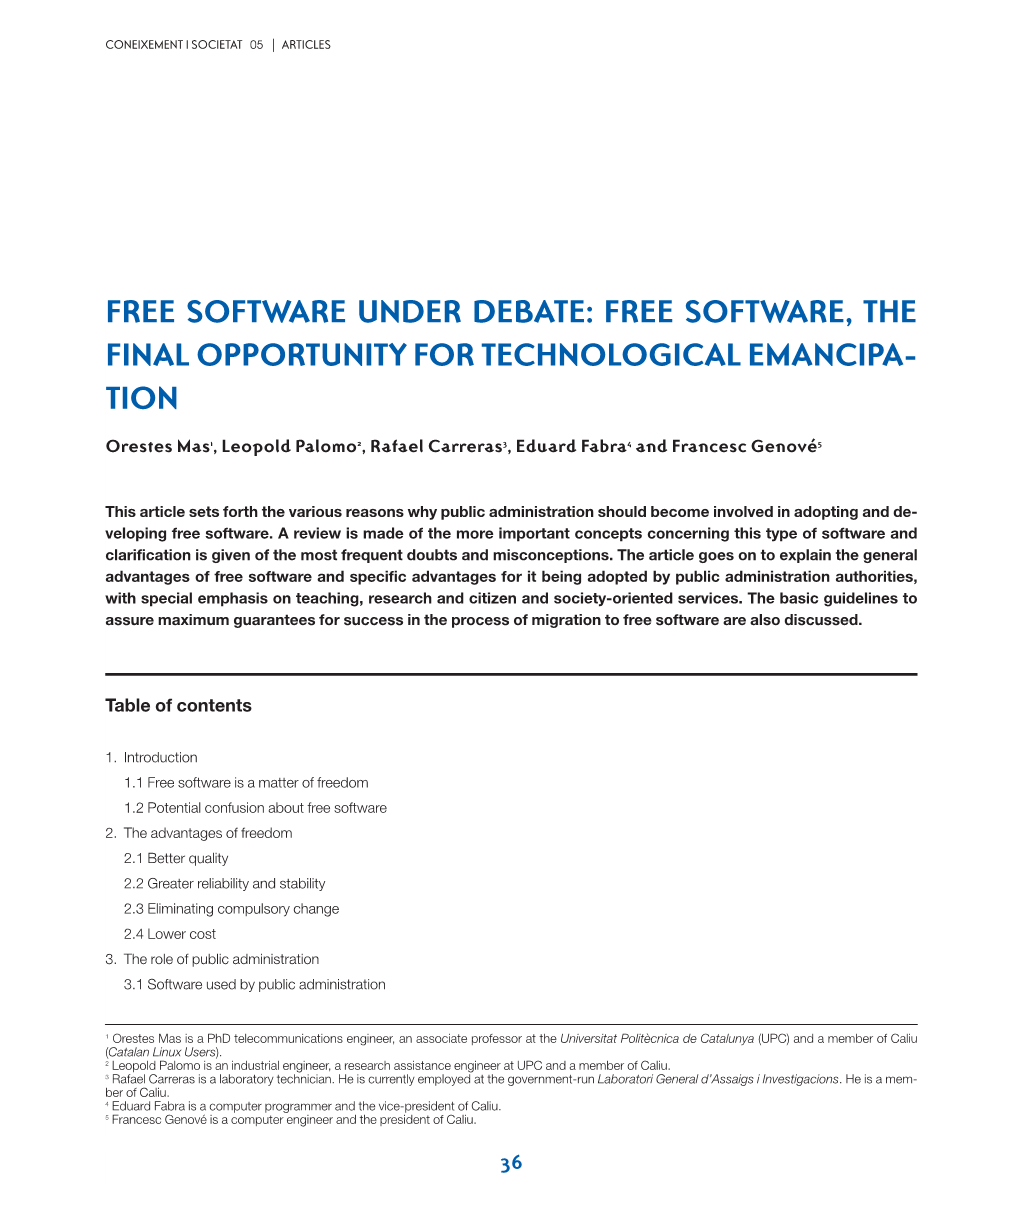 Free Software Under Debate: Free Software, the Final Opportunity for Technological Emancipa- Tion